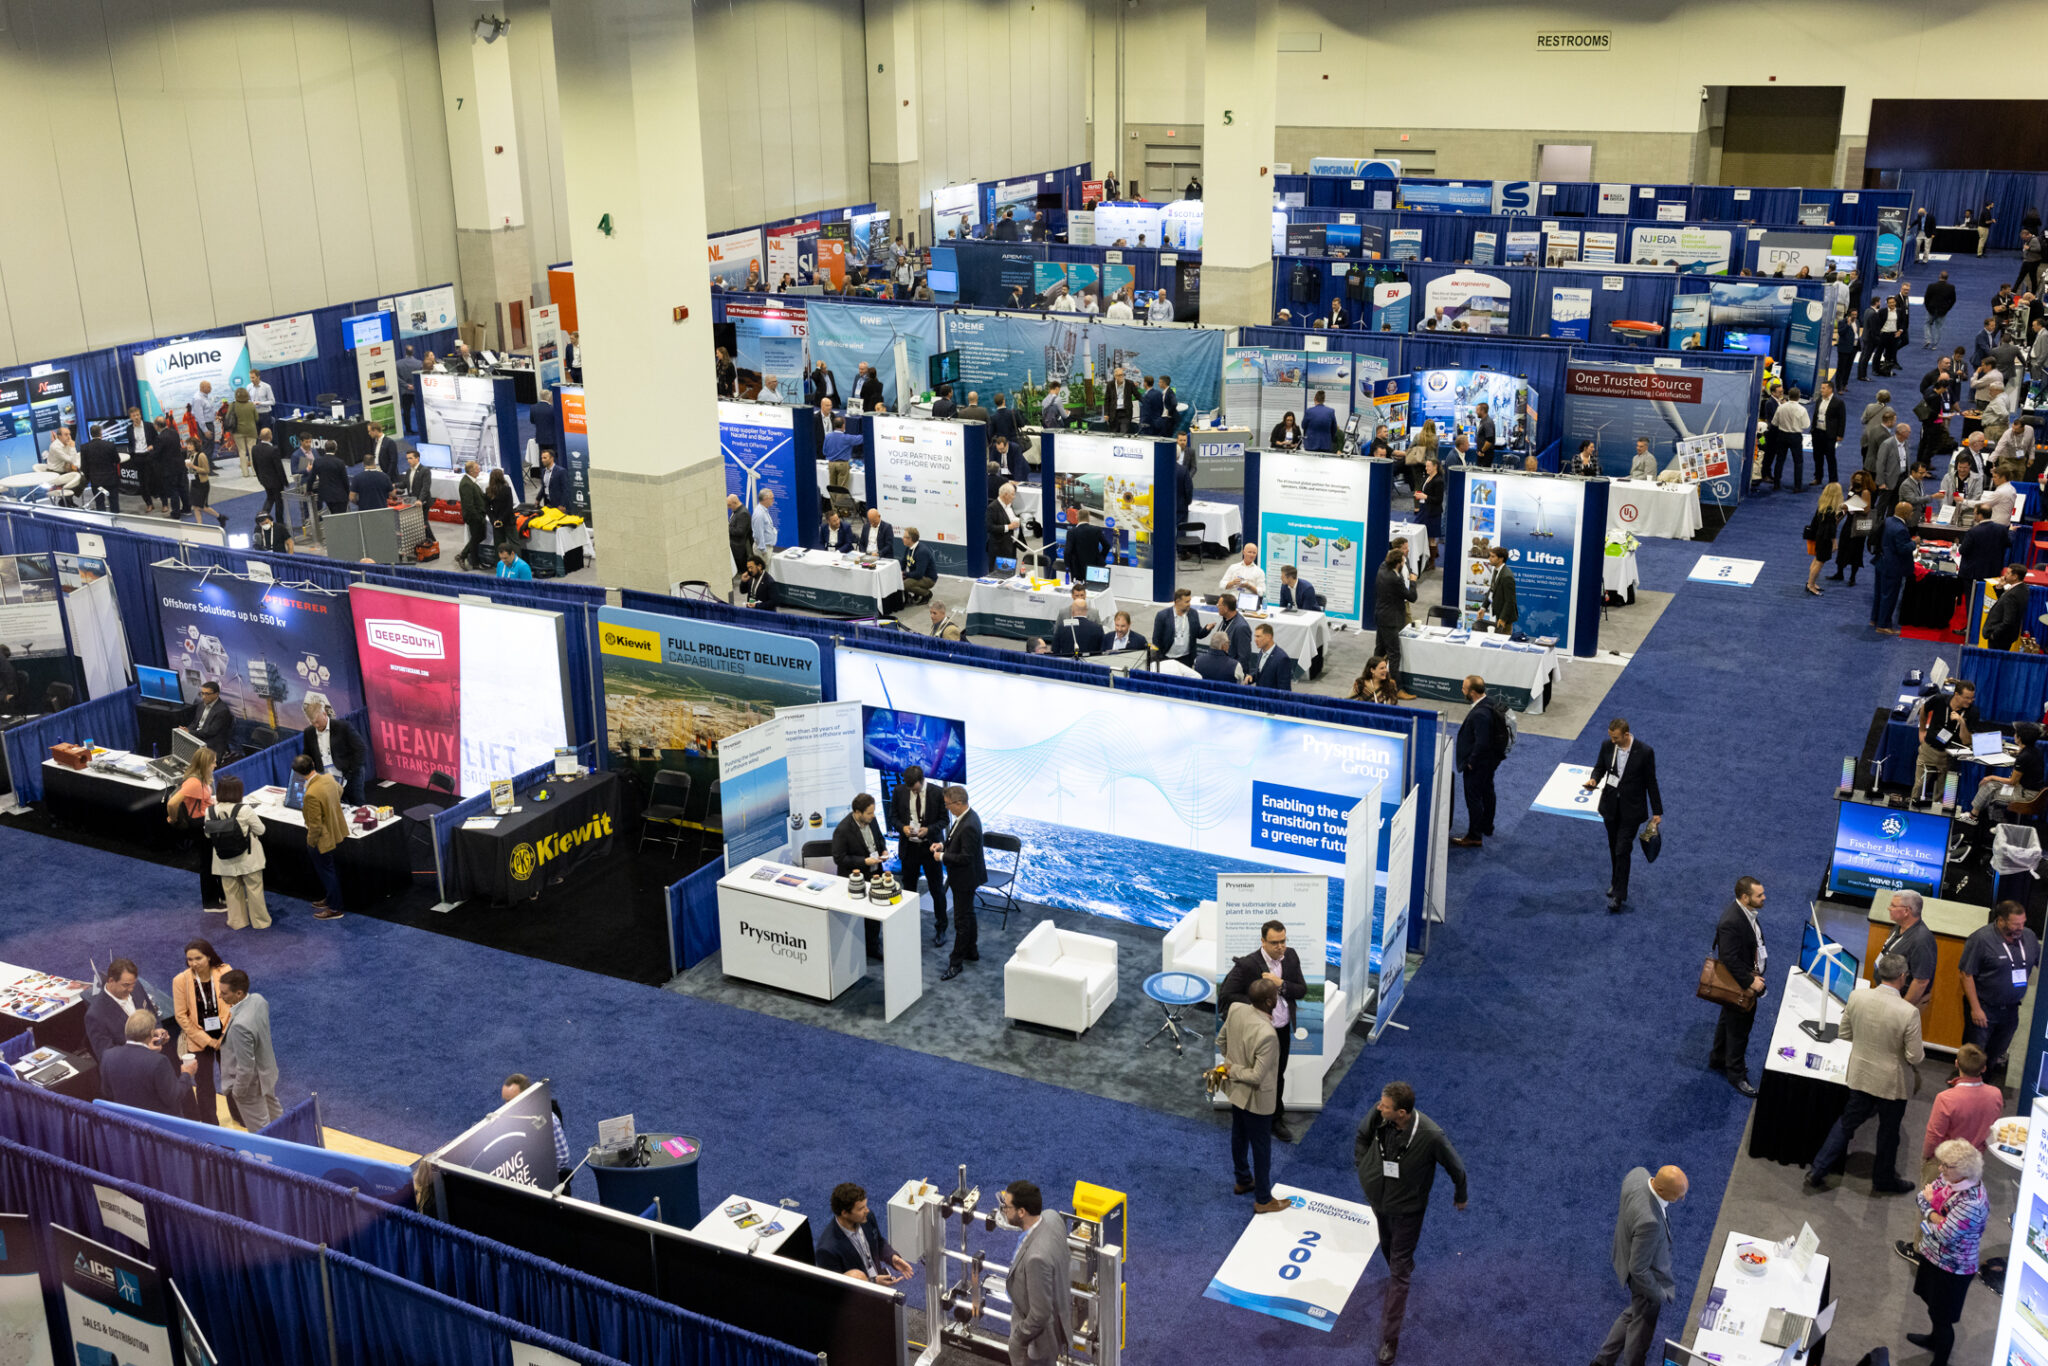 An aerial view of the exhibition hall floor at ACP's Offshore Windpower conference.